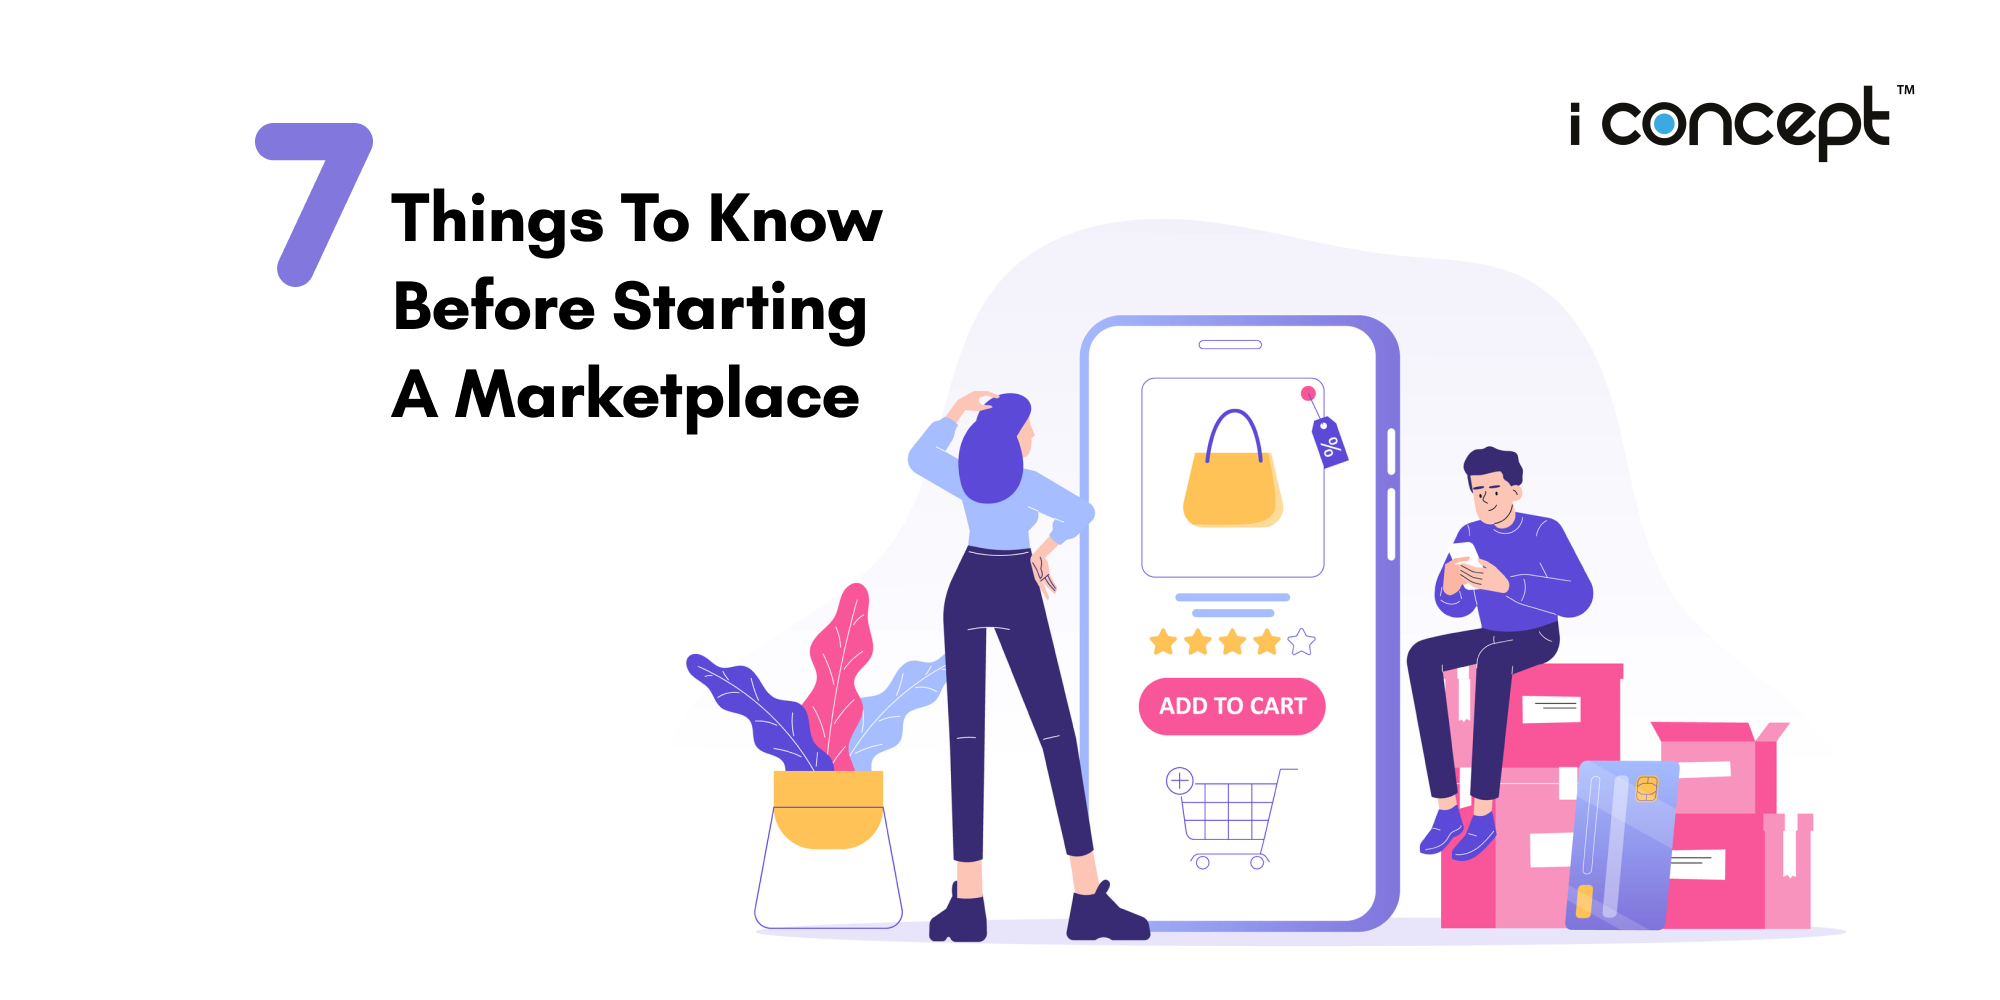 Ecommerce Development in Singapore: 7 Things To Know Before Starting a Marketplace